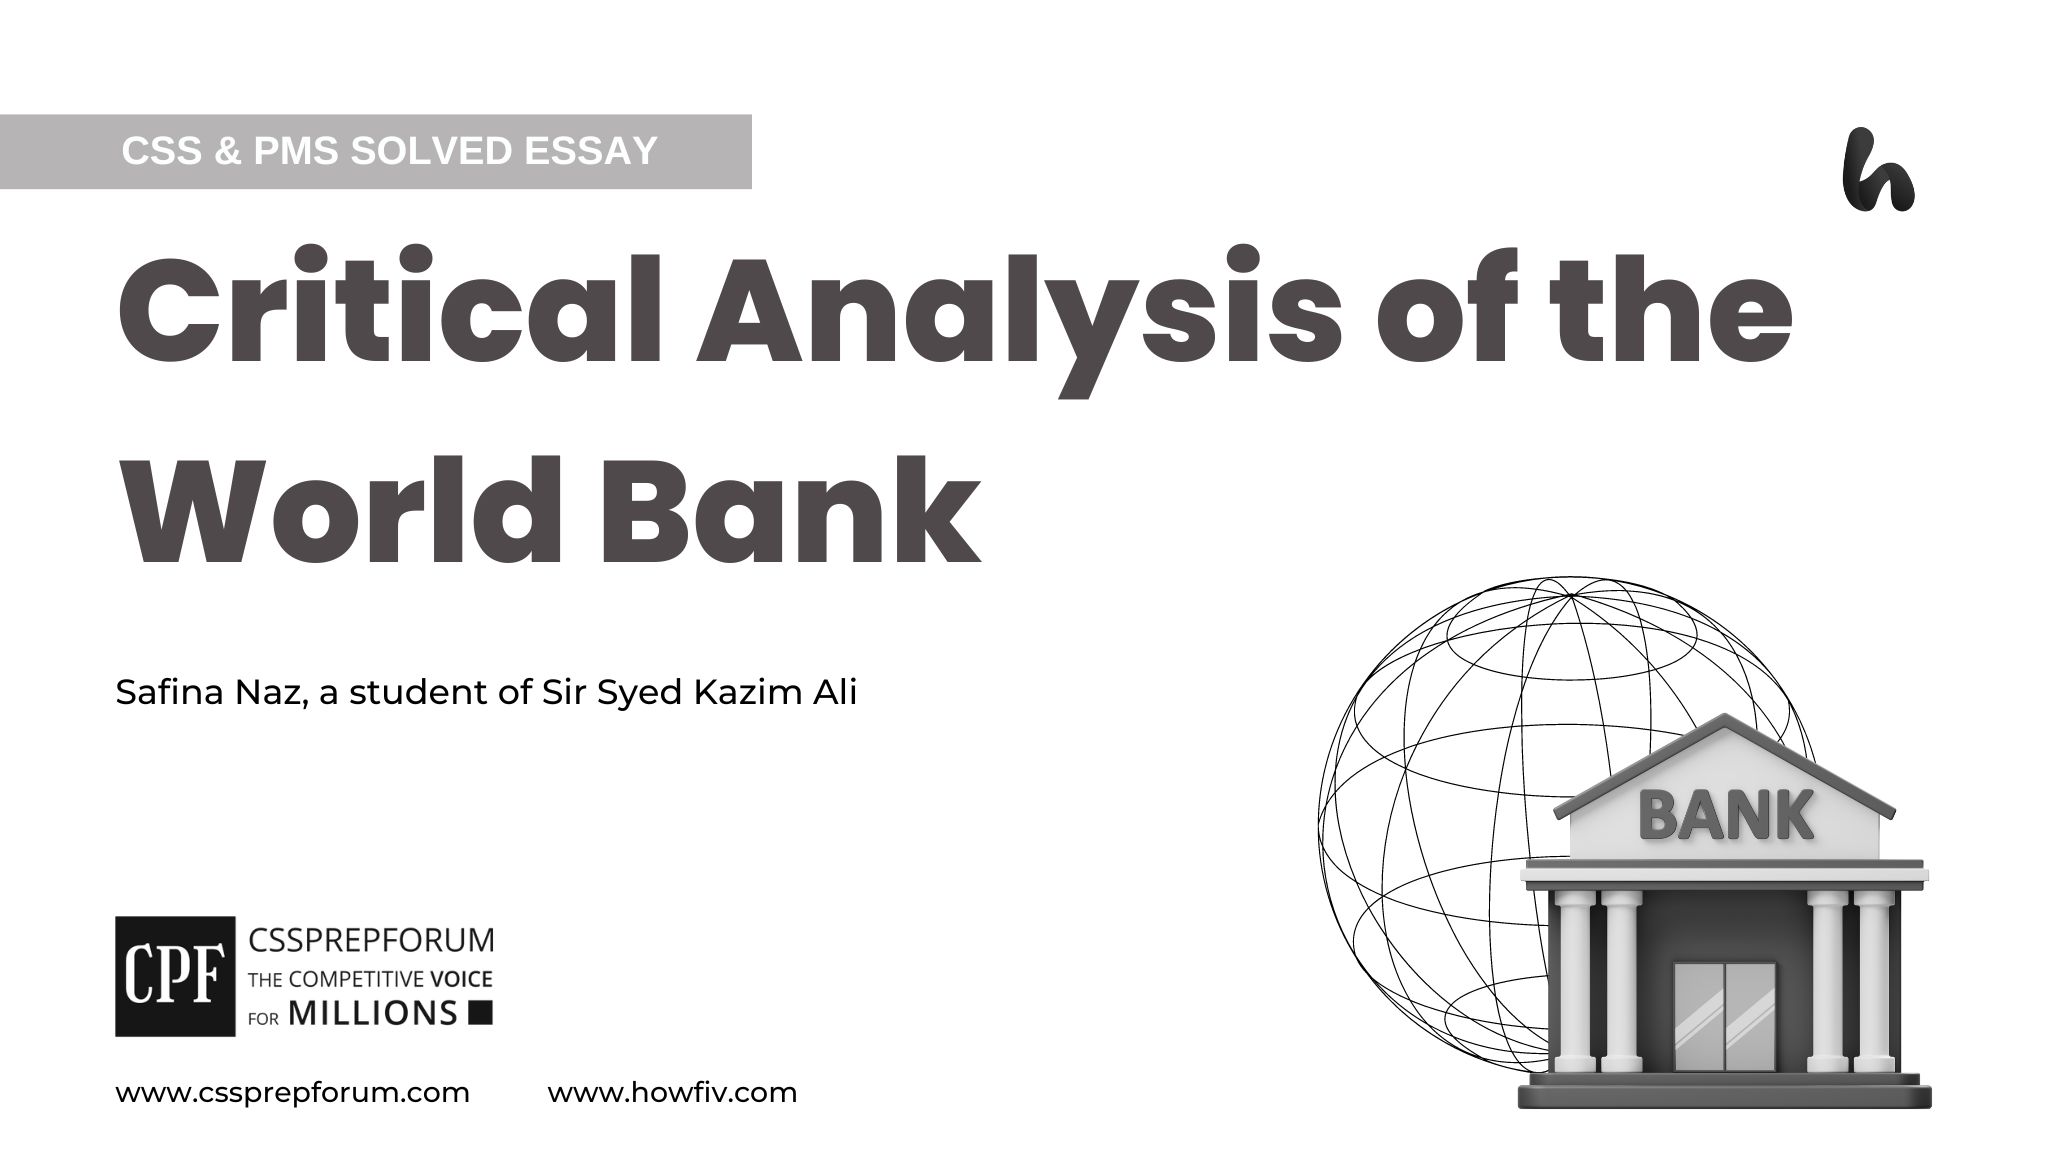 Critical Analysis of the World Bank by Safina Naz